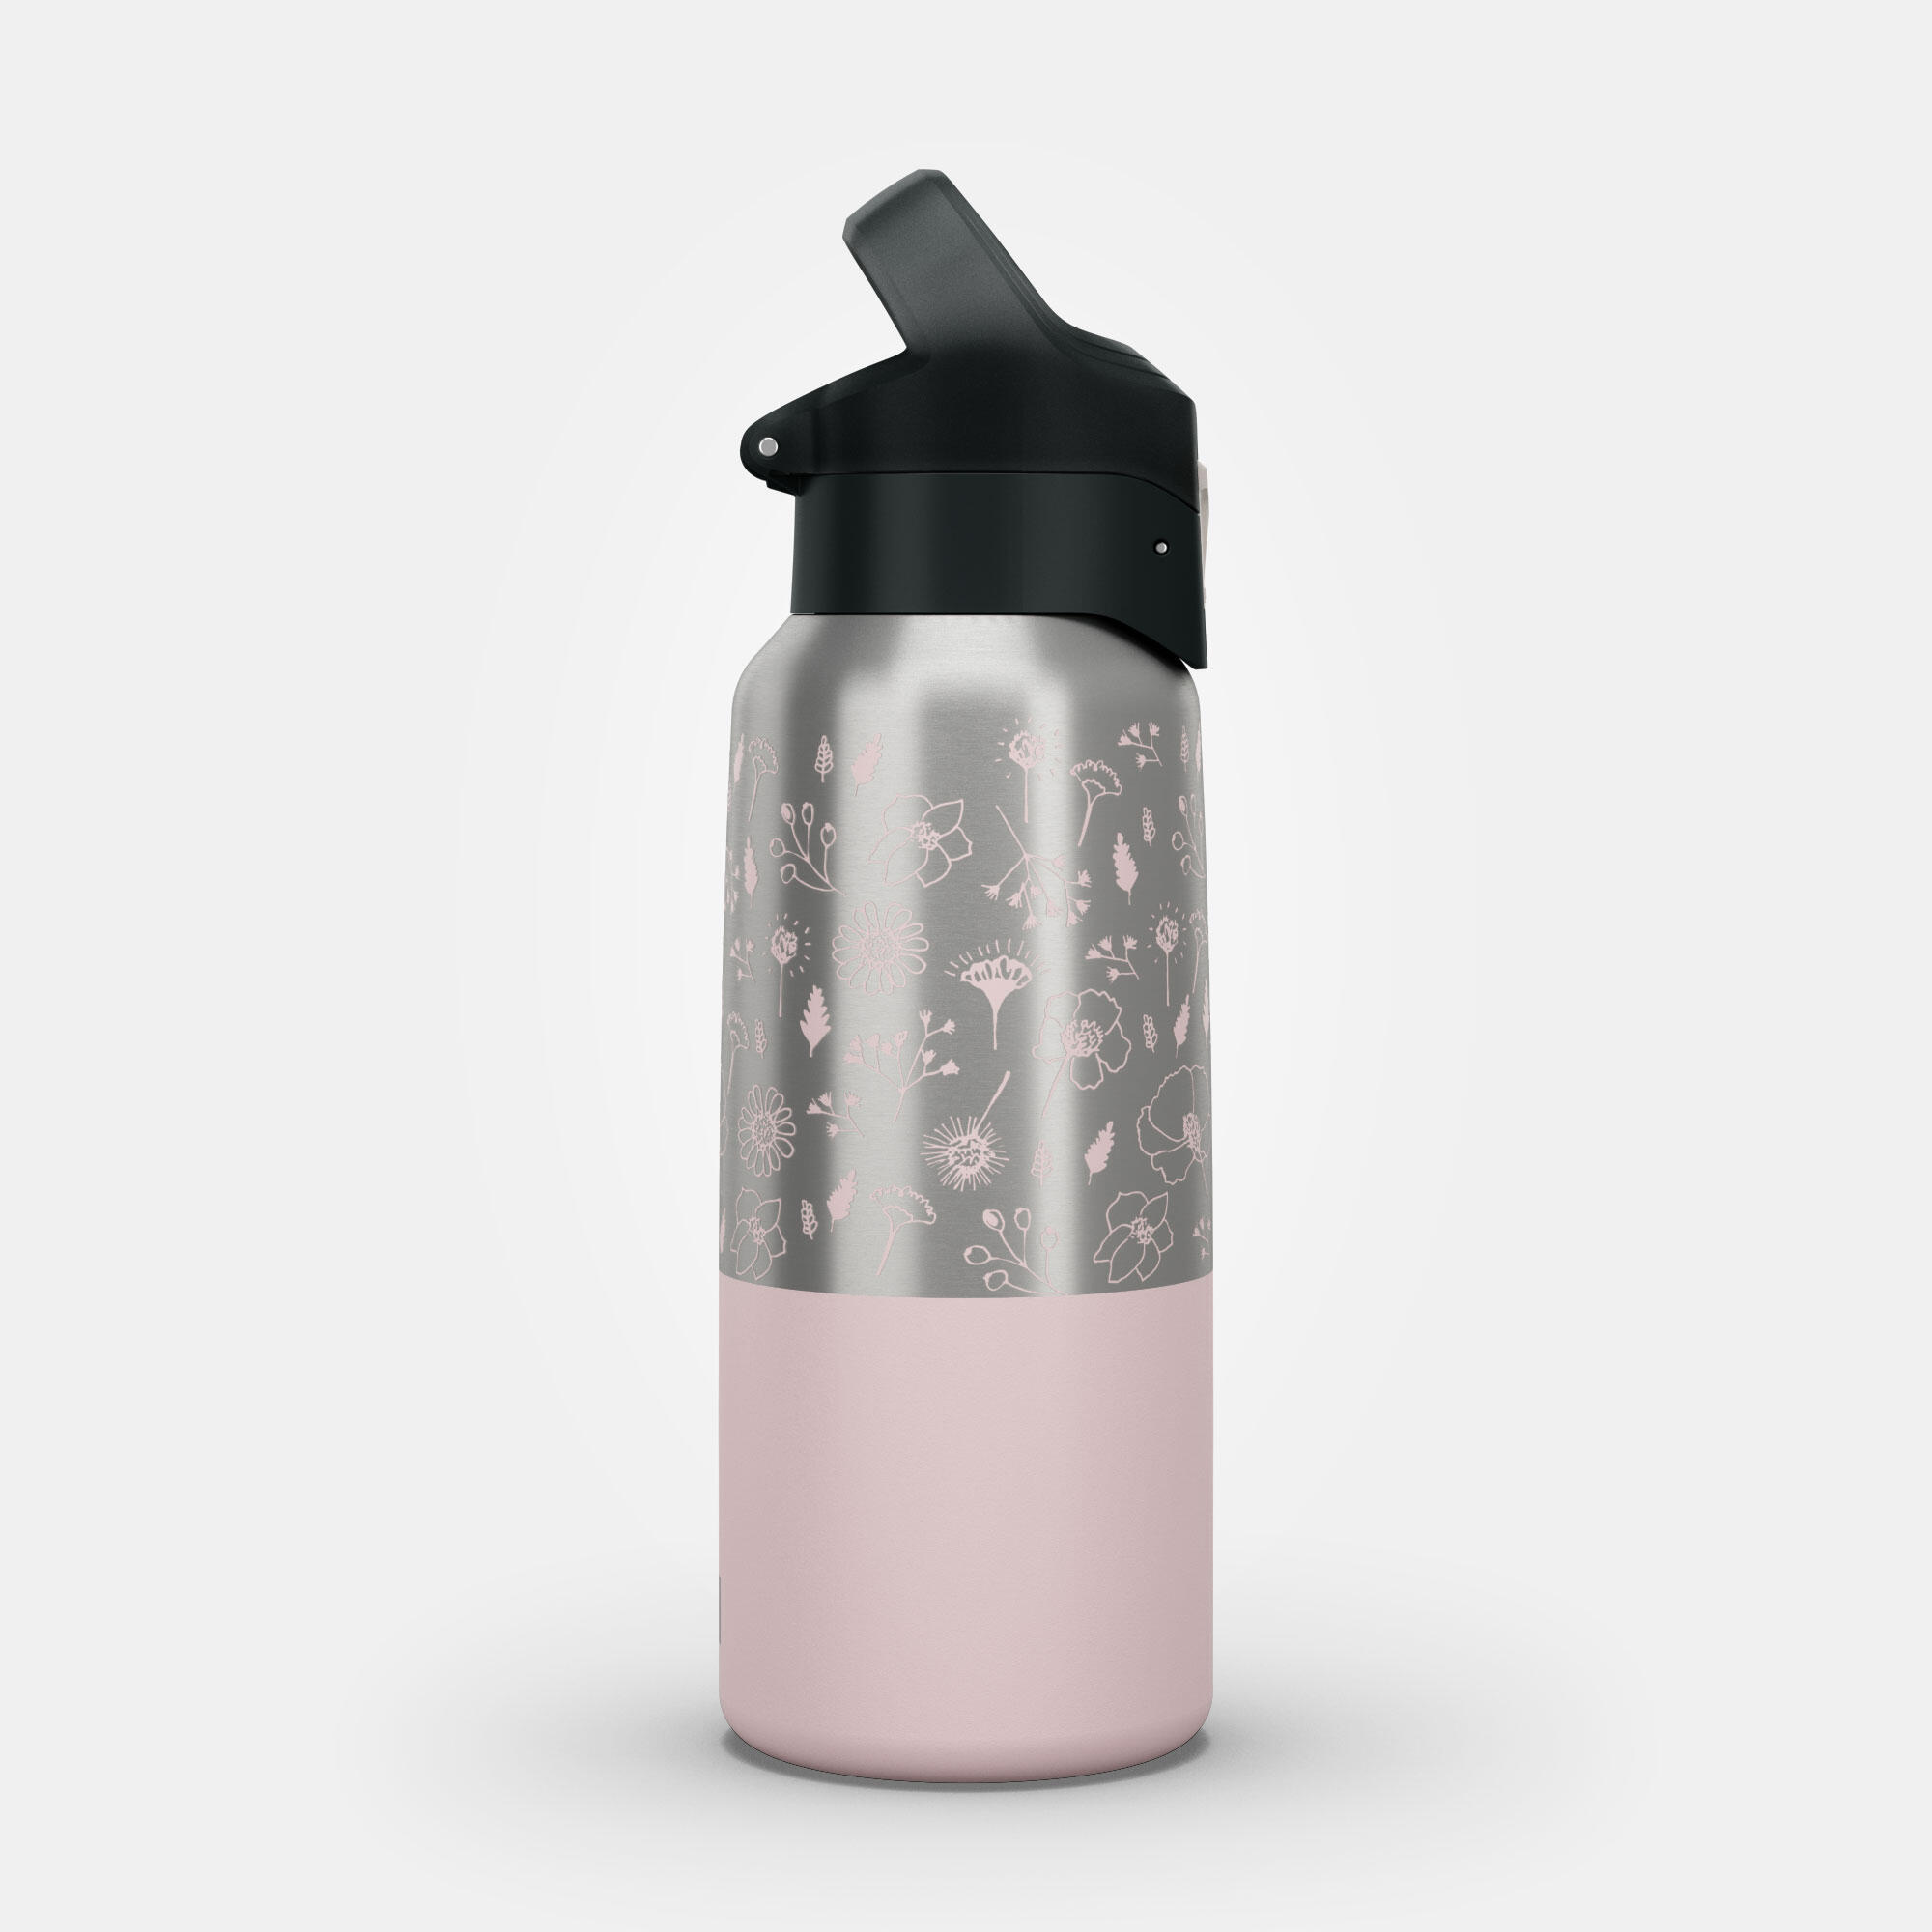 Hiking Insulated Stainless Steel Flask MH500 0.5L Pink 11/12